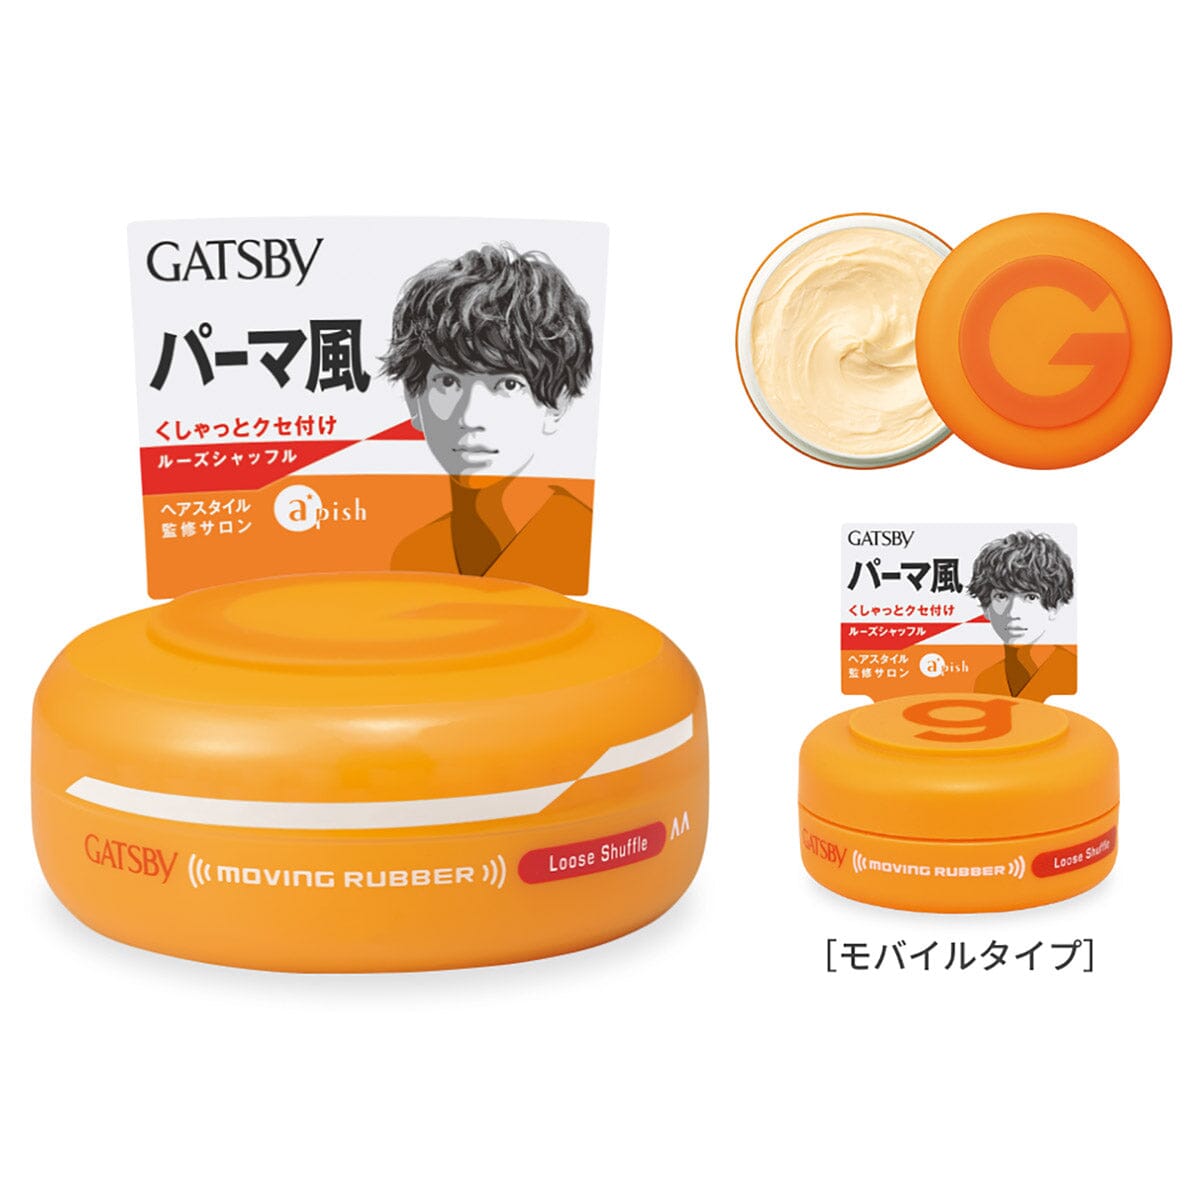 Gatsby Moving Rubber Hair Styling Wax Loose Shuffle